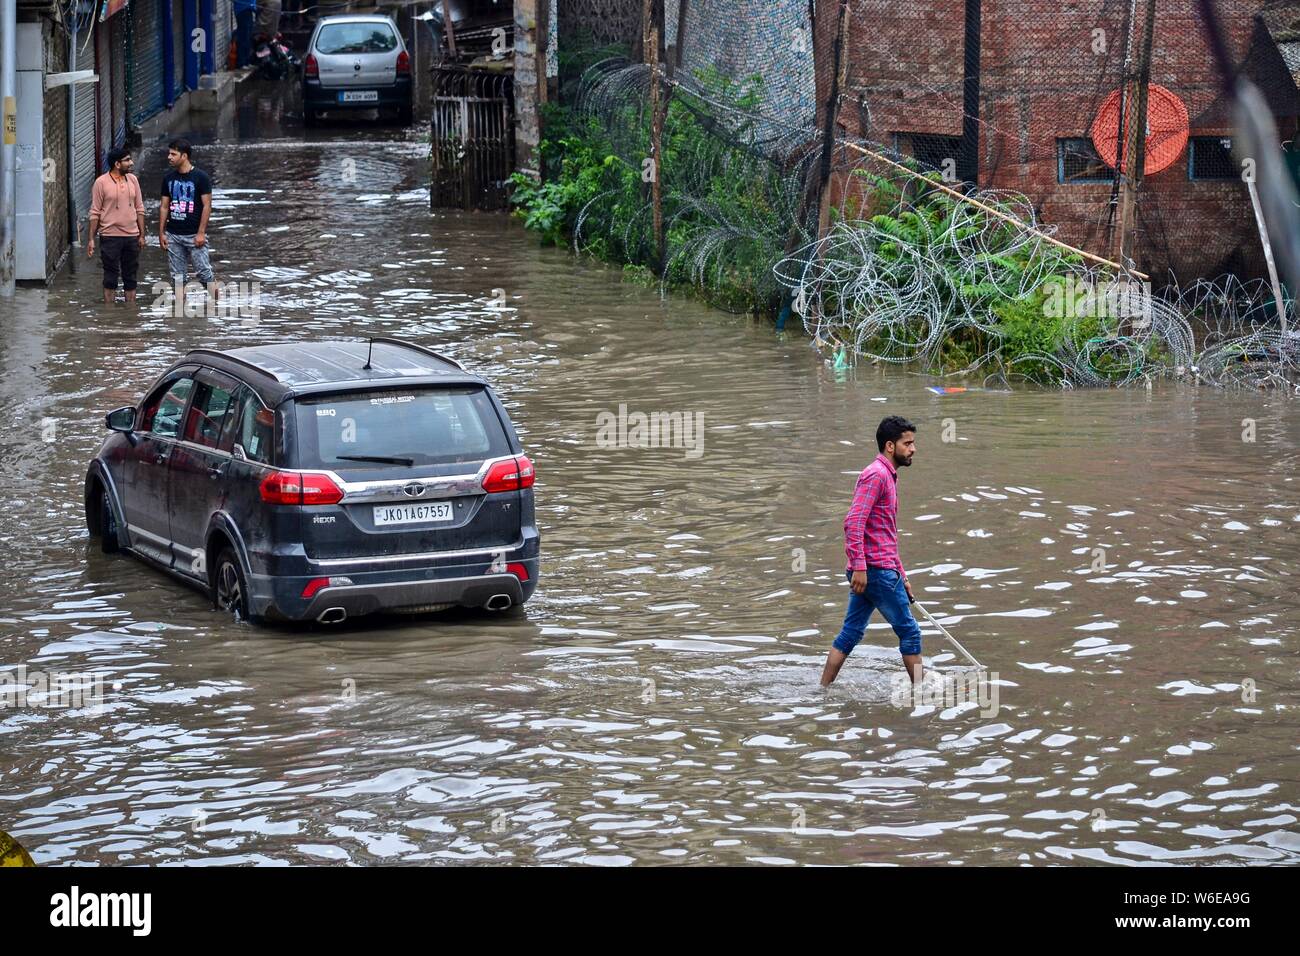 Srinagar, India. 01st Aug, 2019. A man wades after the heavy rains in Srinagar.Rains caused water-logging in many areas of Srinagar exposing the poor drainage system of the city. The weather department has predicted heavy rainfall for next few days all over the region. Credit: SOPA Images Limited/Alamy Live News Stock Photo